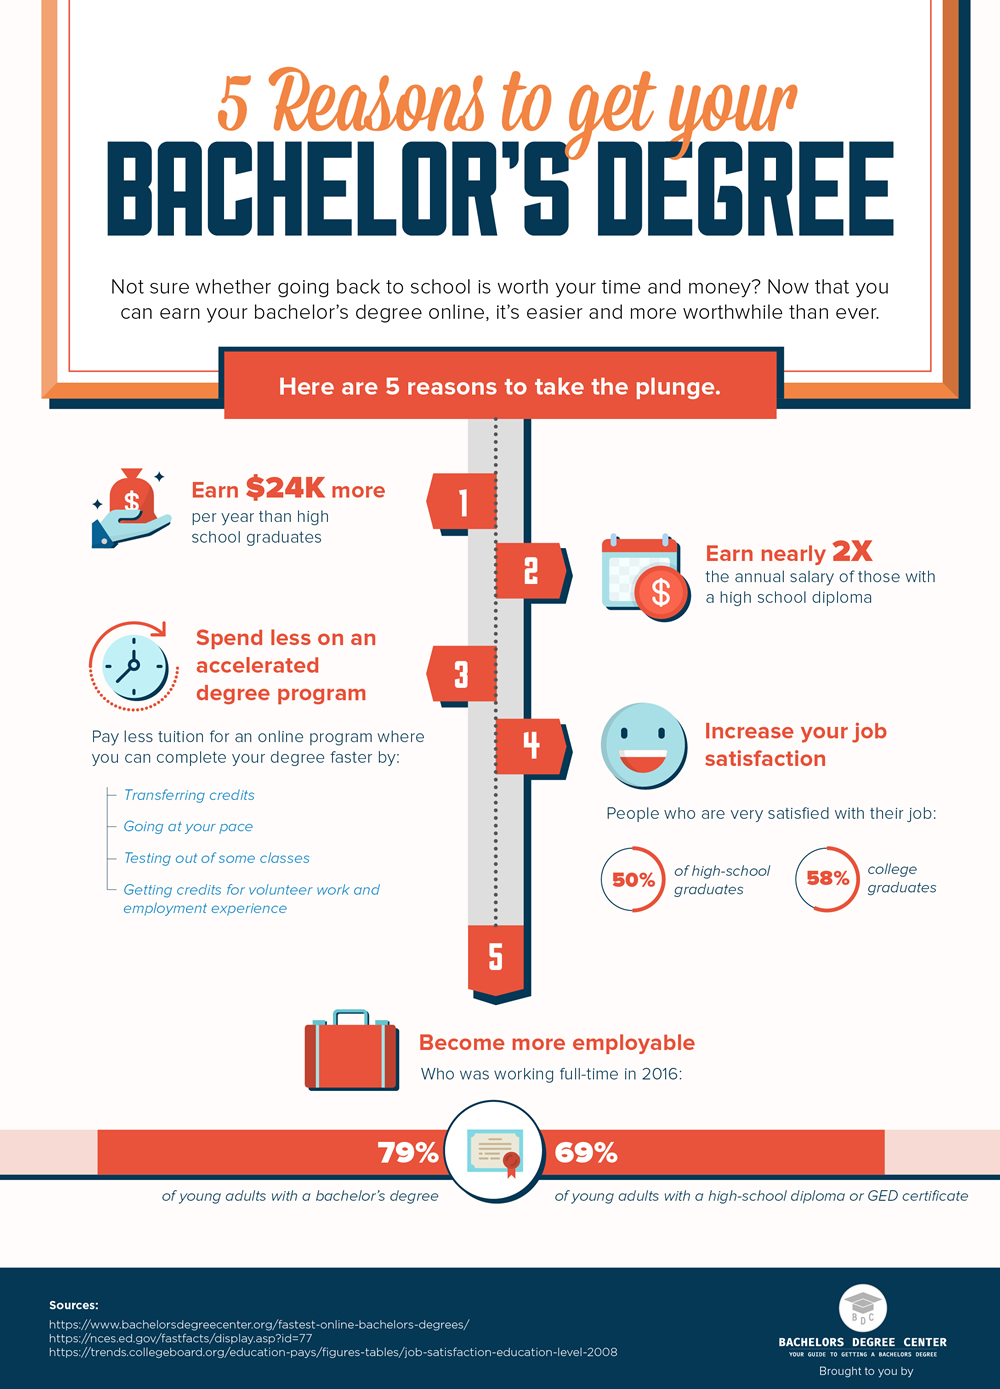 5 Reasons to Get A Bachelor's Degree - Bachelors Degree Center